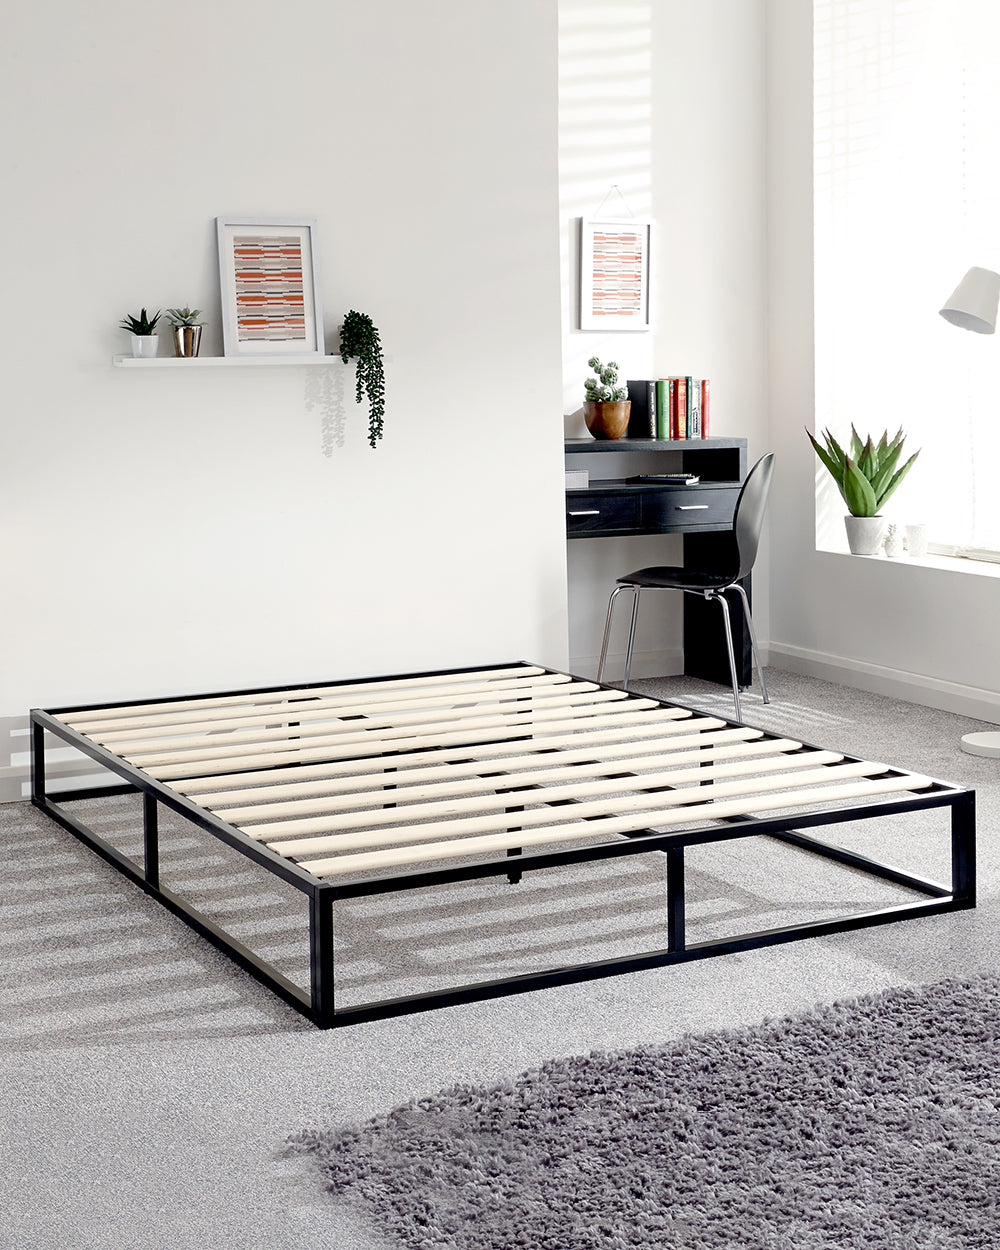 Platform double bed frame GFW lifestyle photo in a bedroom